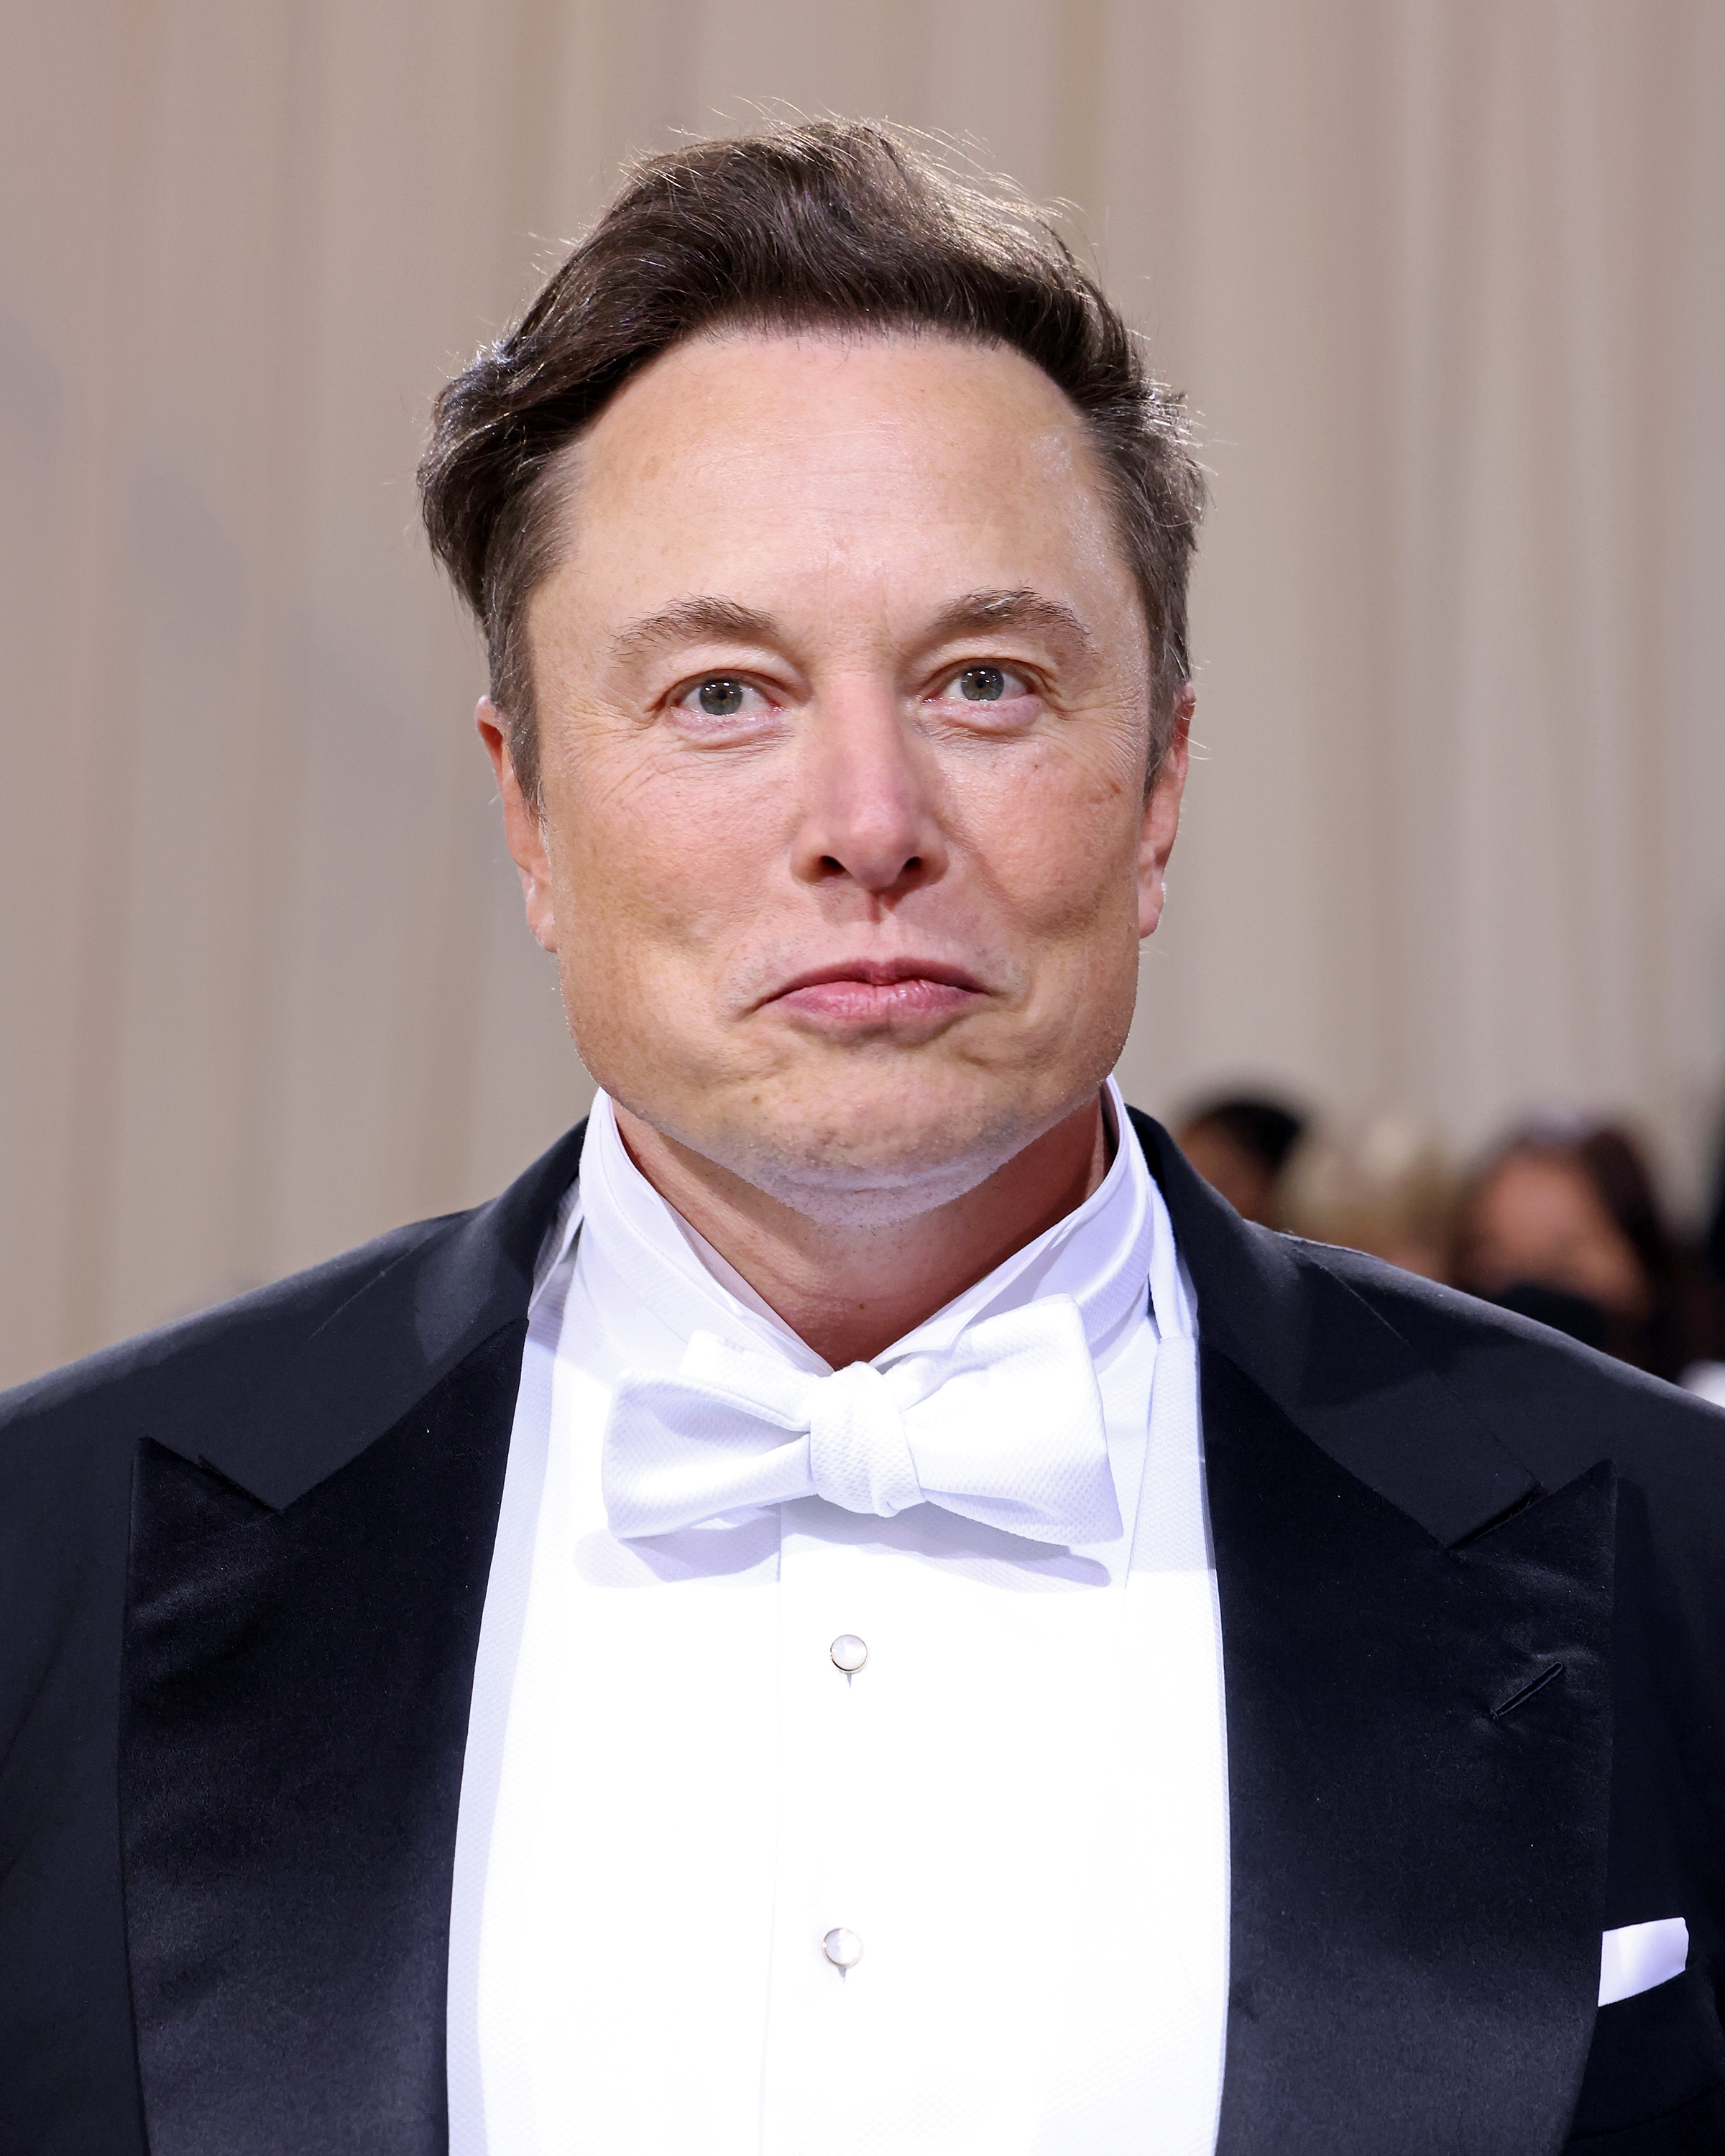 Elon Musk at the 2022 MET Gala on May 2, 2022, in New York City. | Source: Getty Images